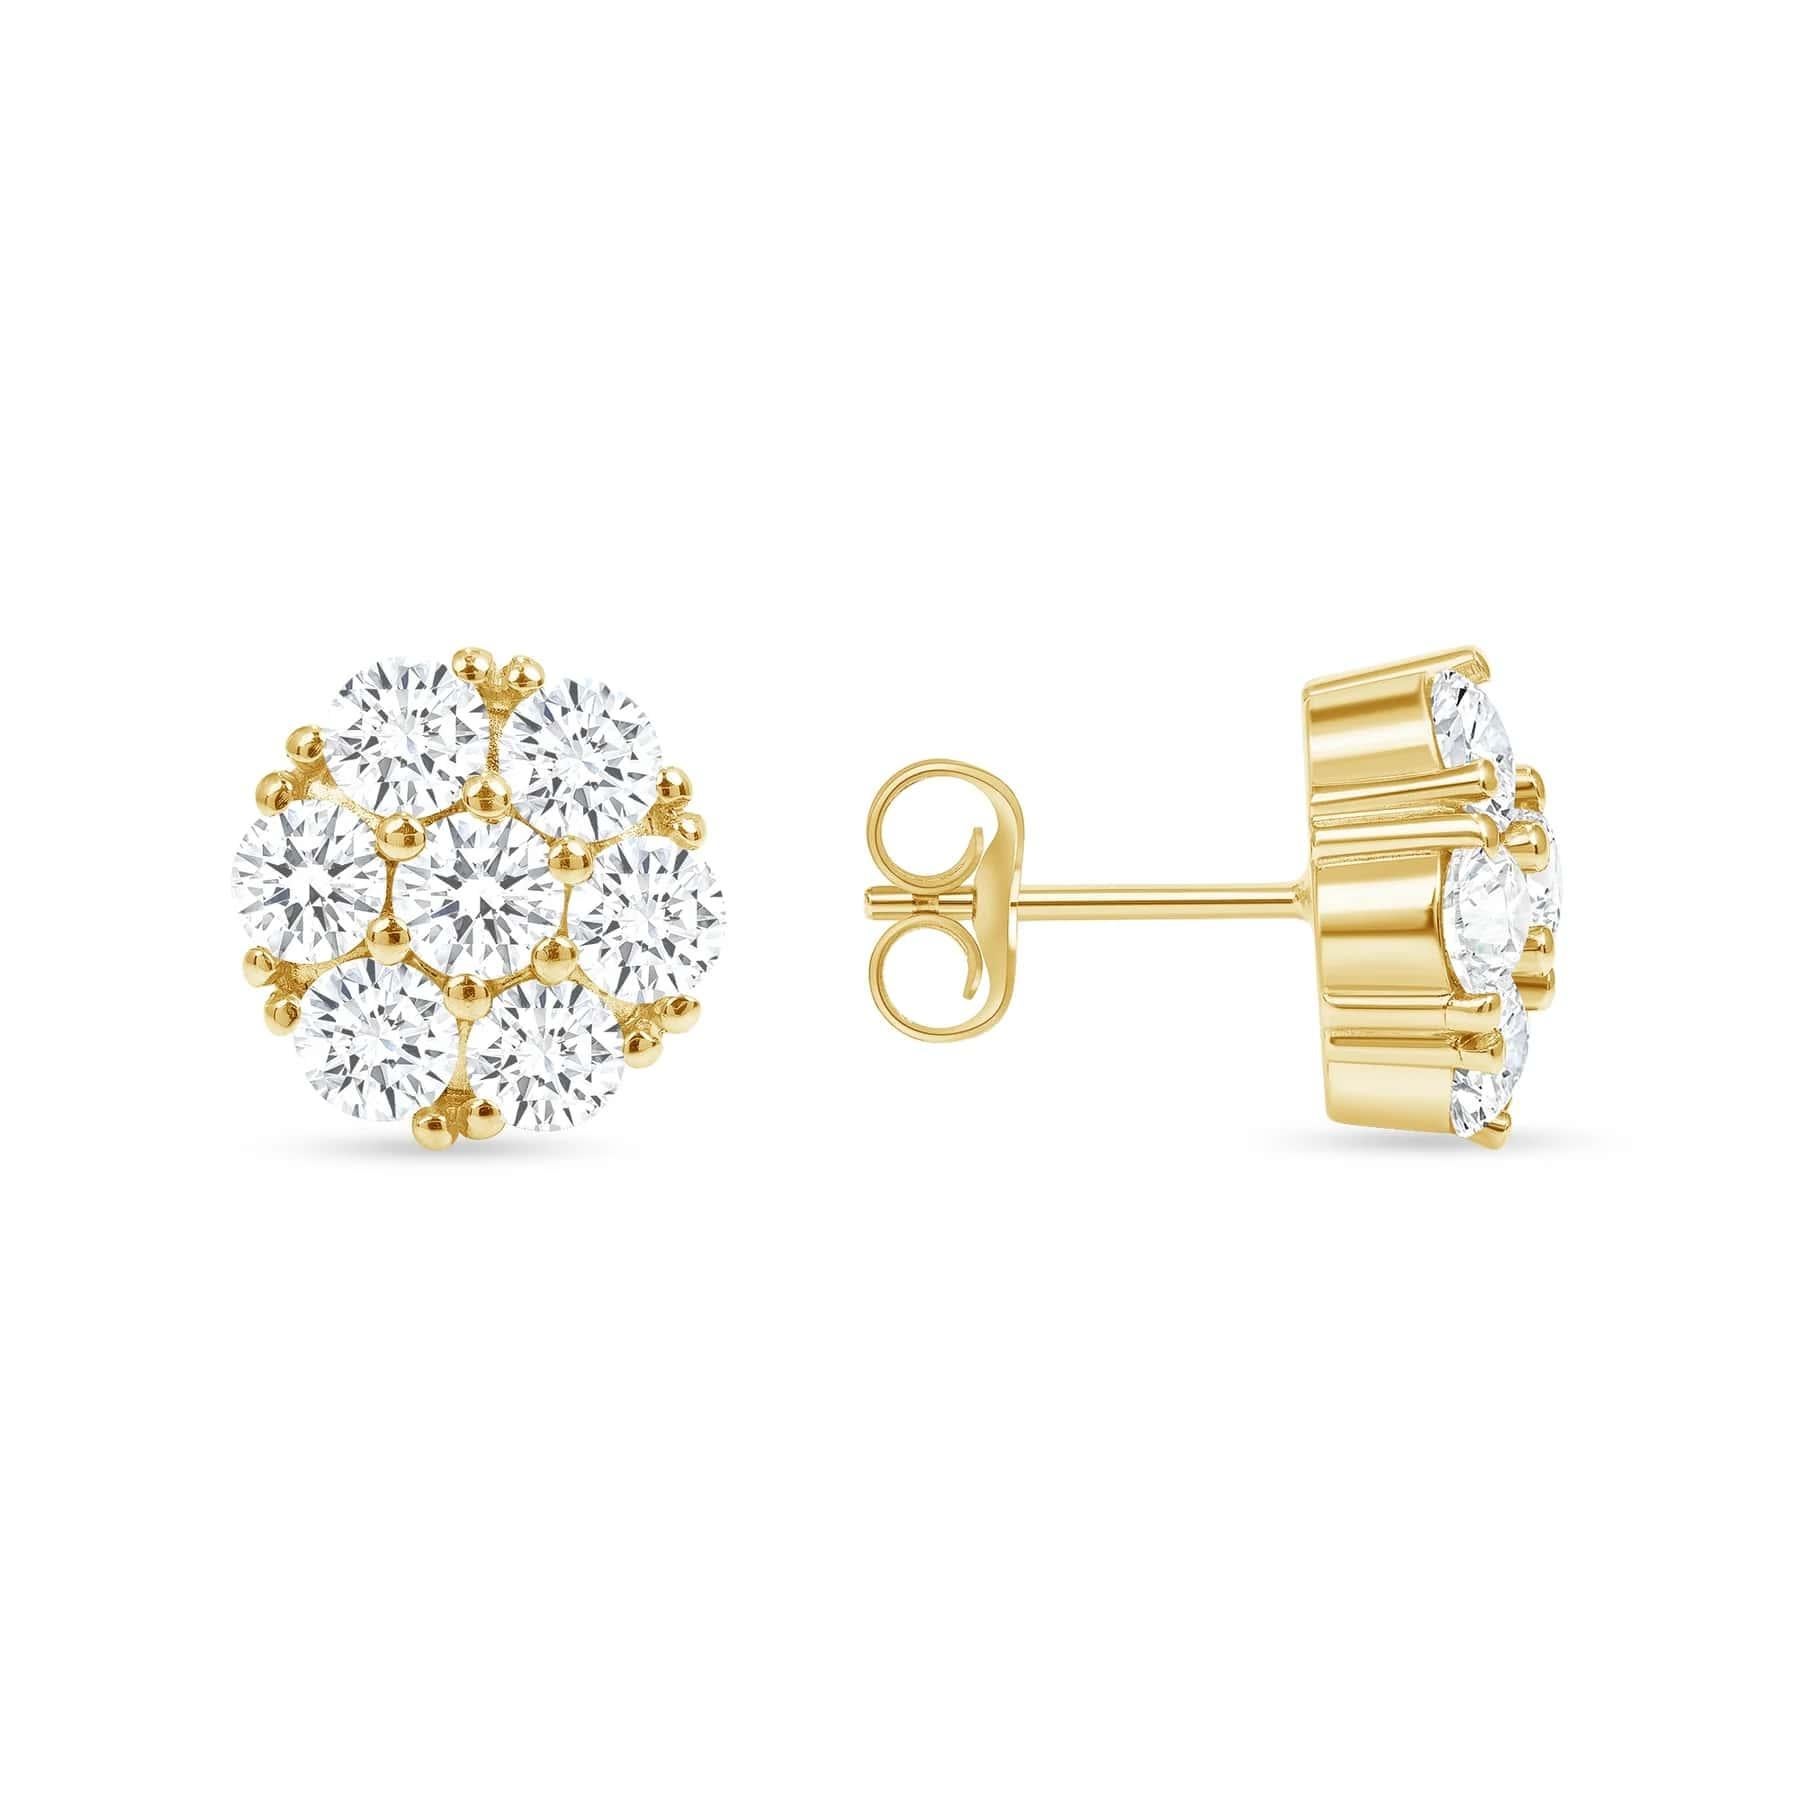 These beautifully matched diamond stud earrings feature round diamonds set in a 14k gold settings.

Earrings Information 
Setting : Push Back Setting 
Metal : 14k Gold
Diamond Carat Weight : 0.50ttcw
Diamond Cut : Round Natural Conflict Free